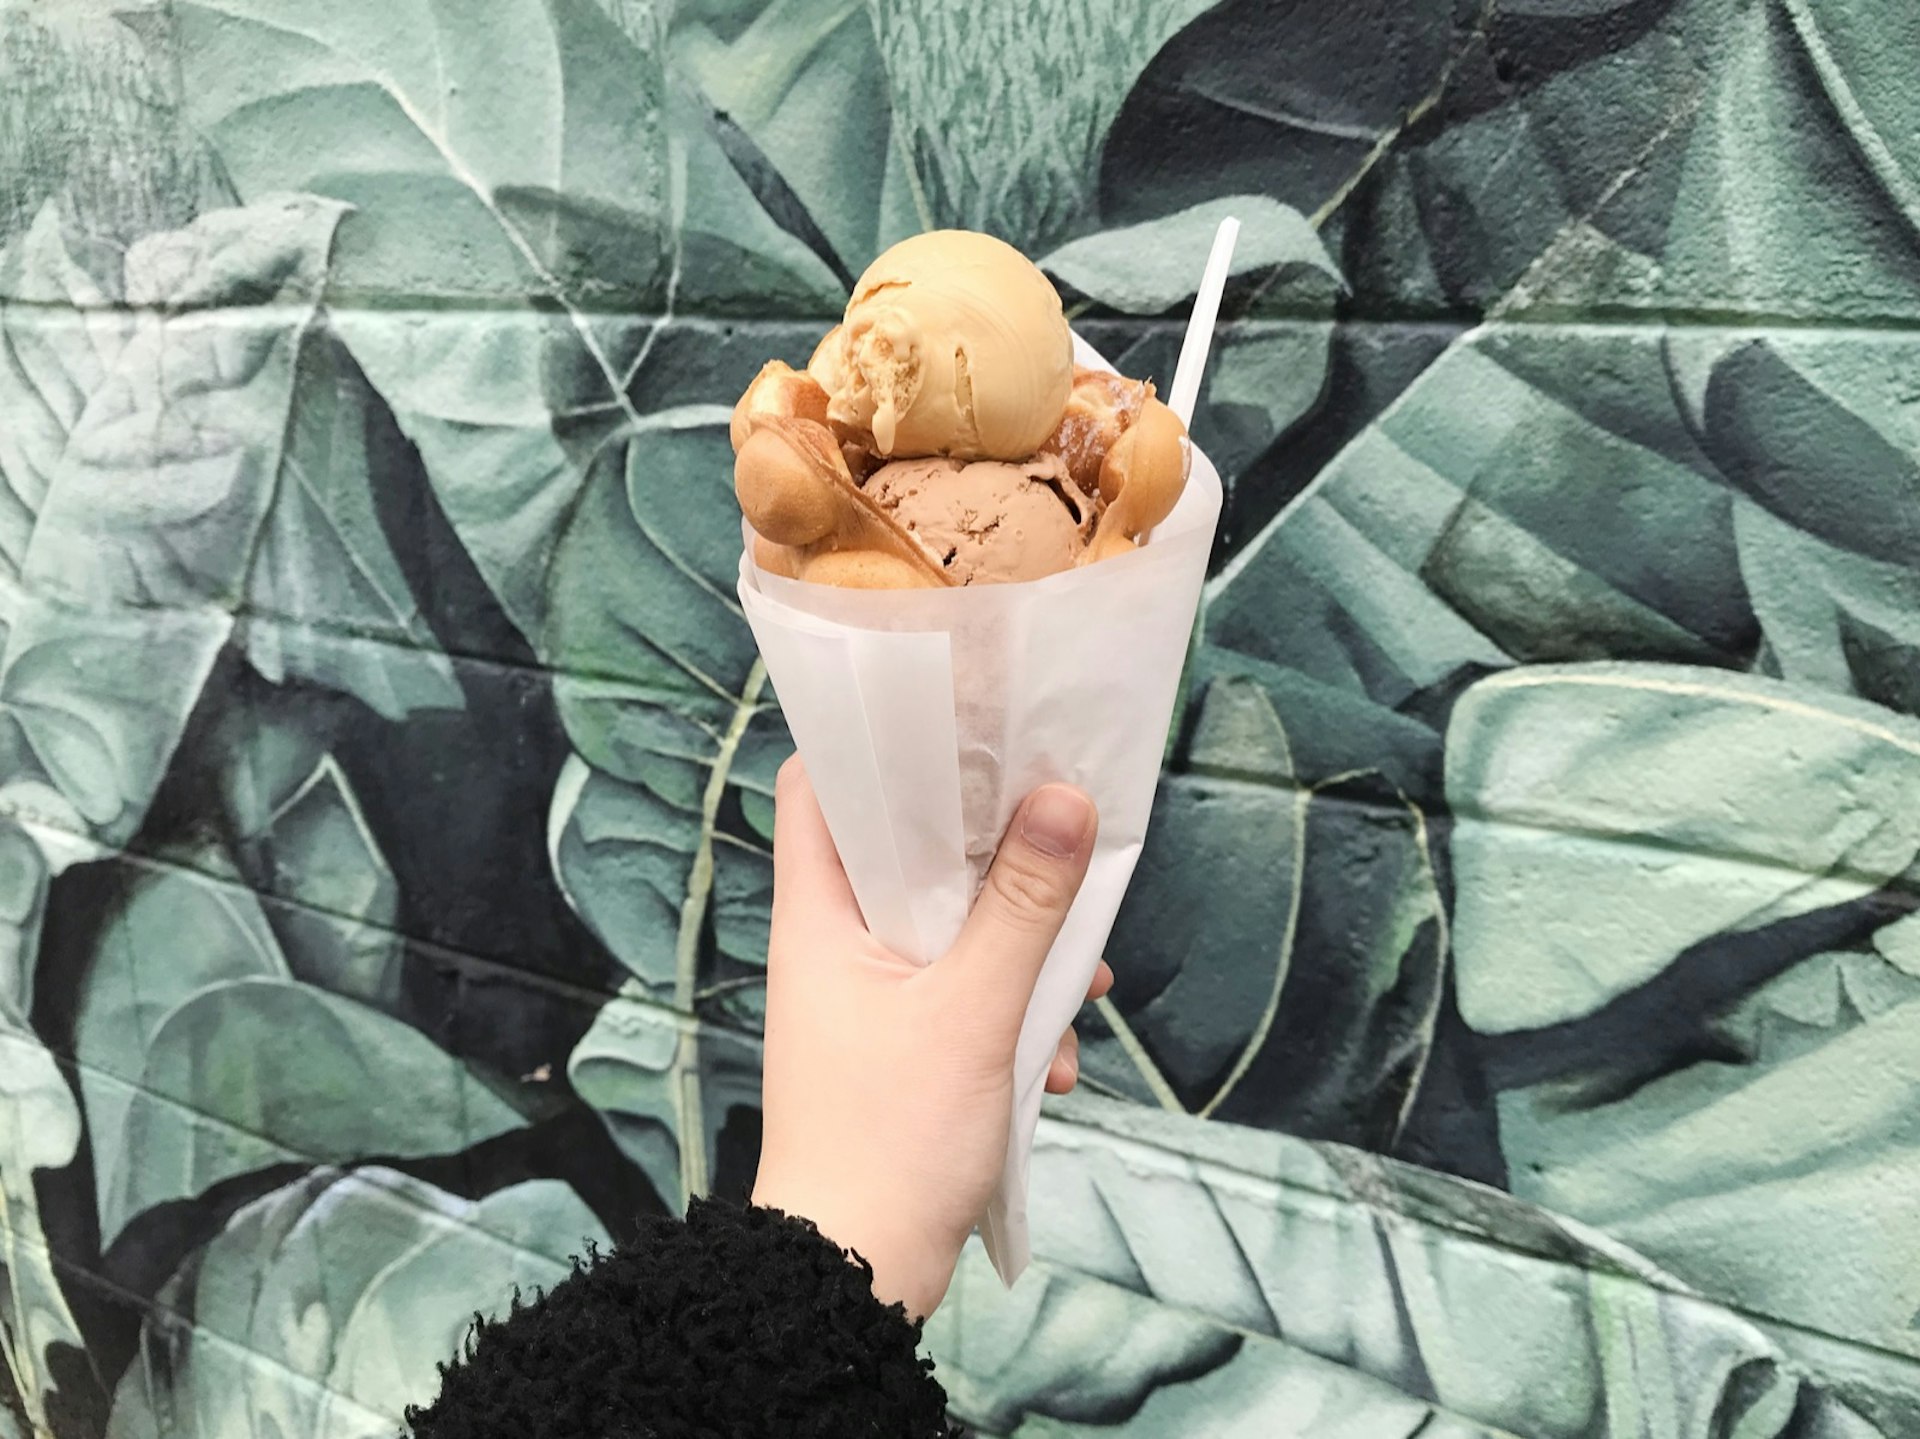 Ice cream is piled high in a rolled up waffle, in front of a mural depicting leaves